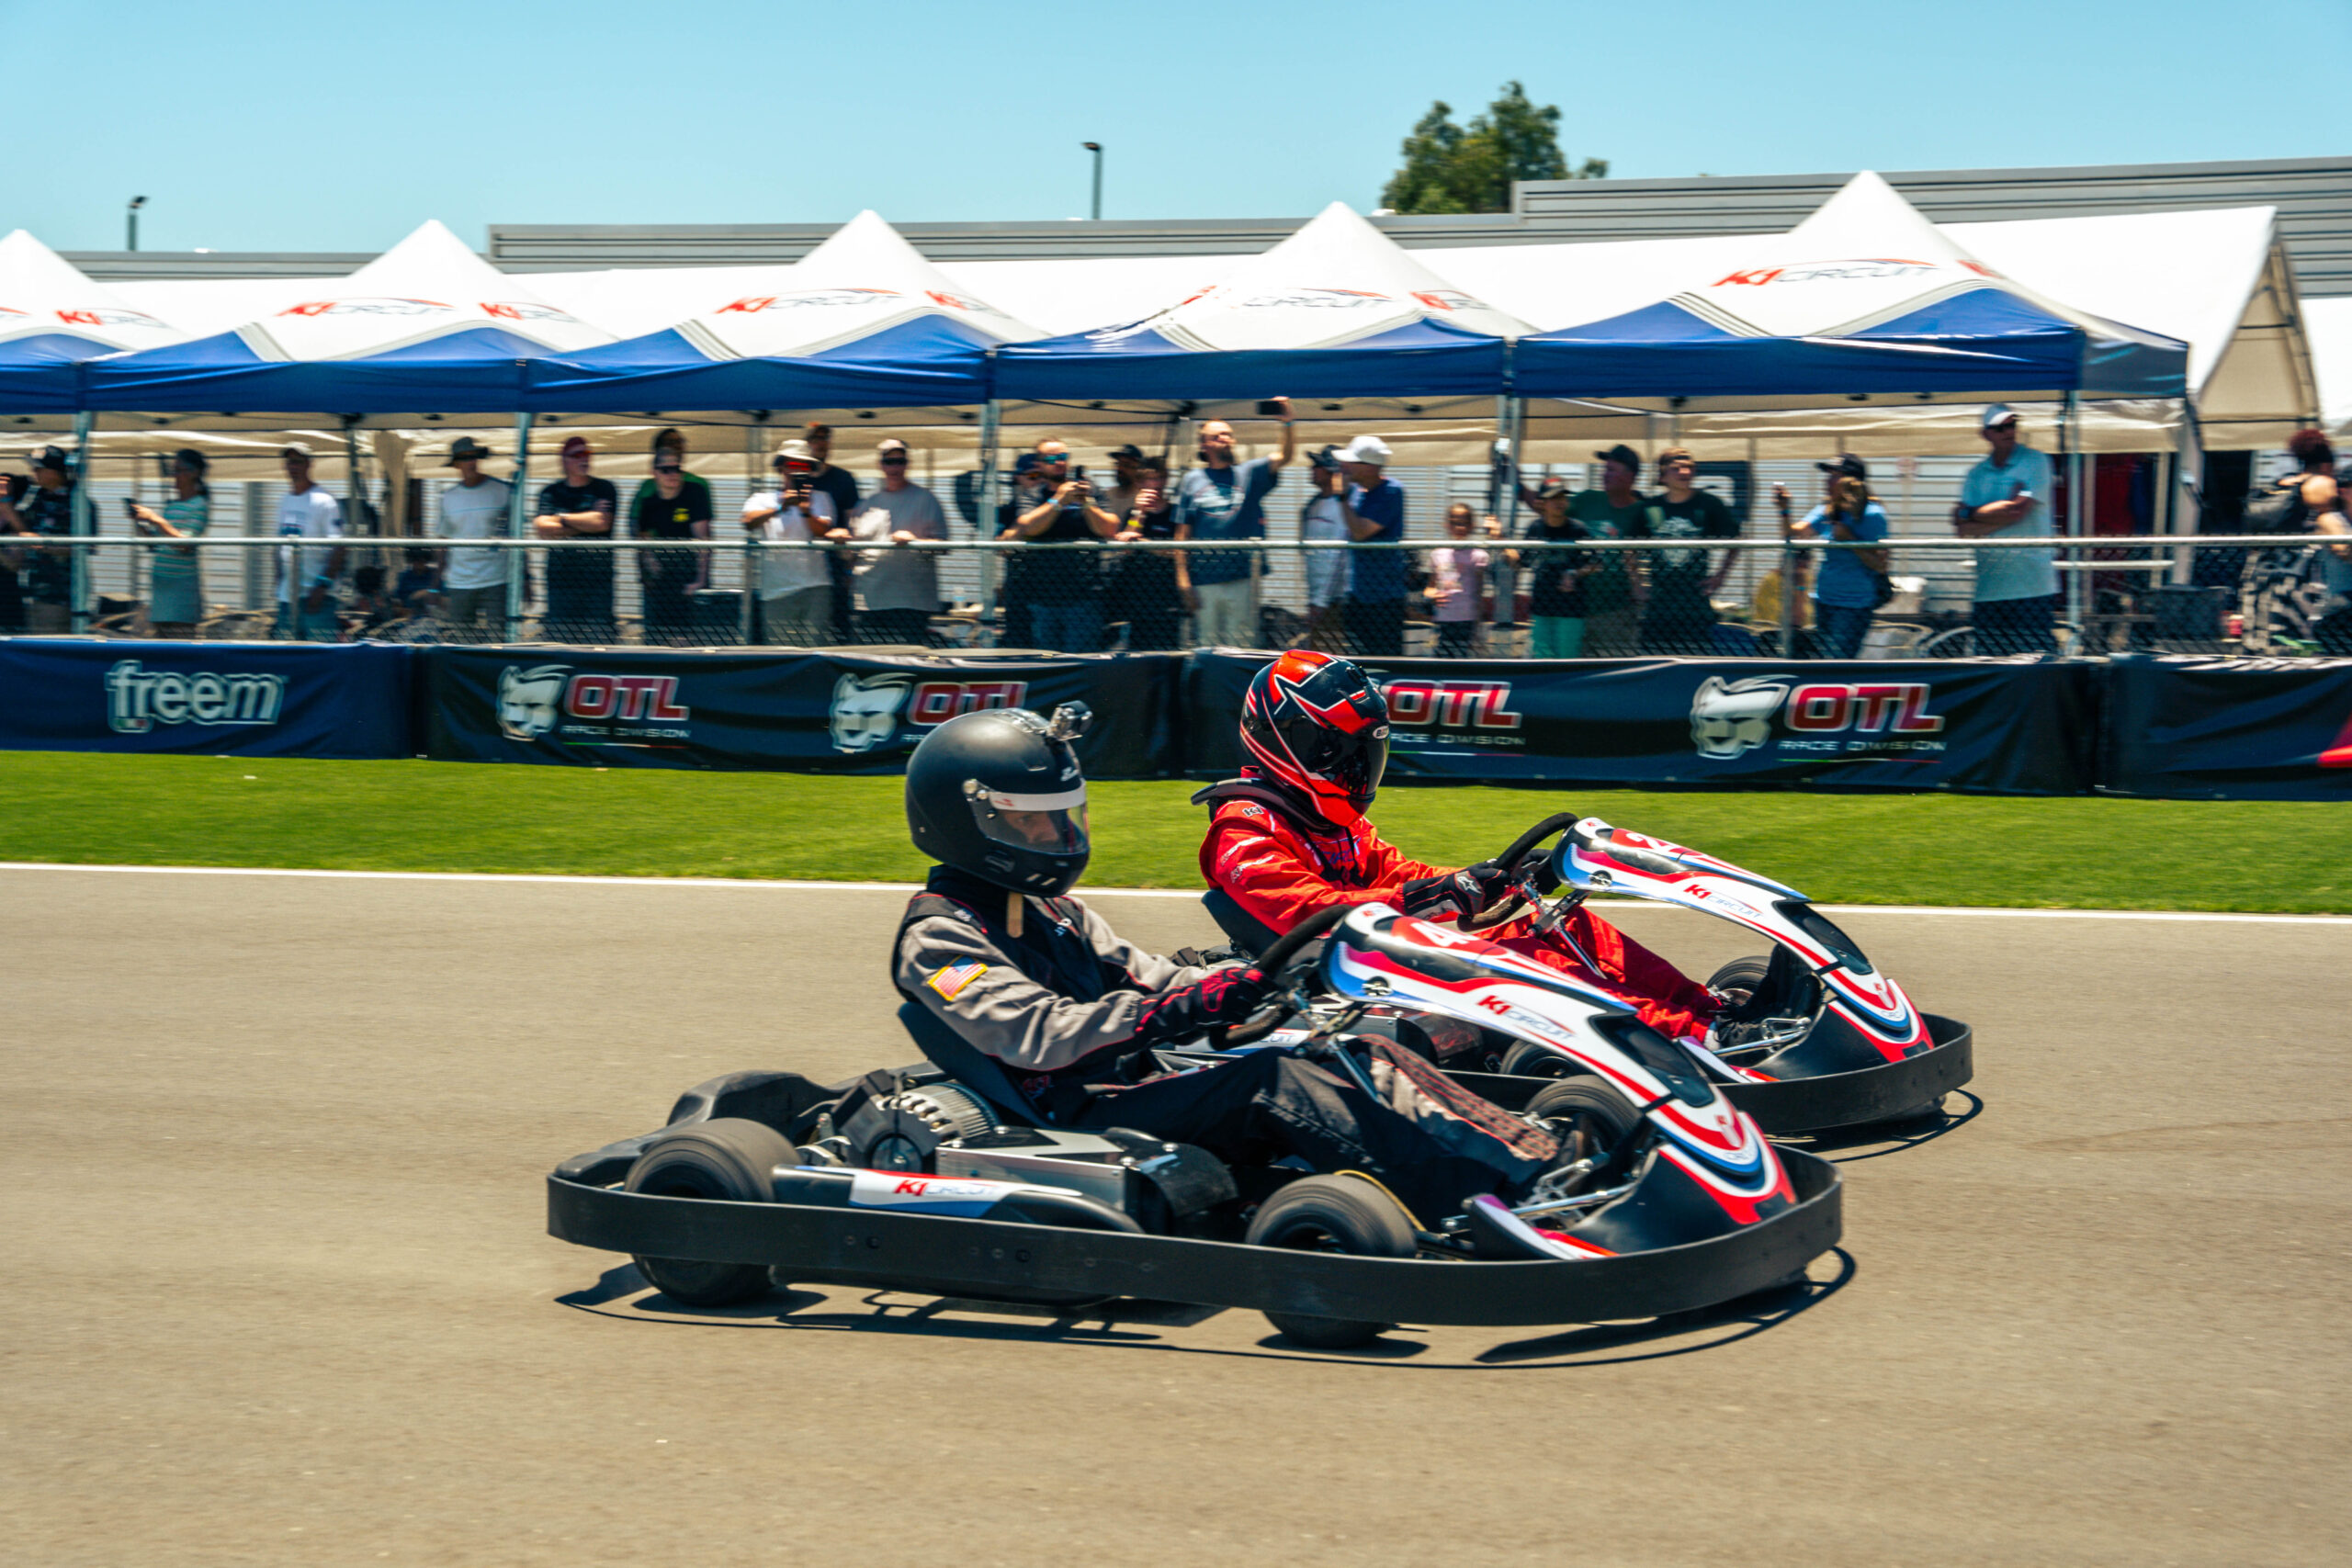 two go karts race side by side on the main straight at k1 circuit